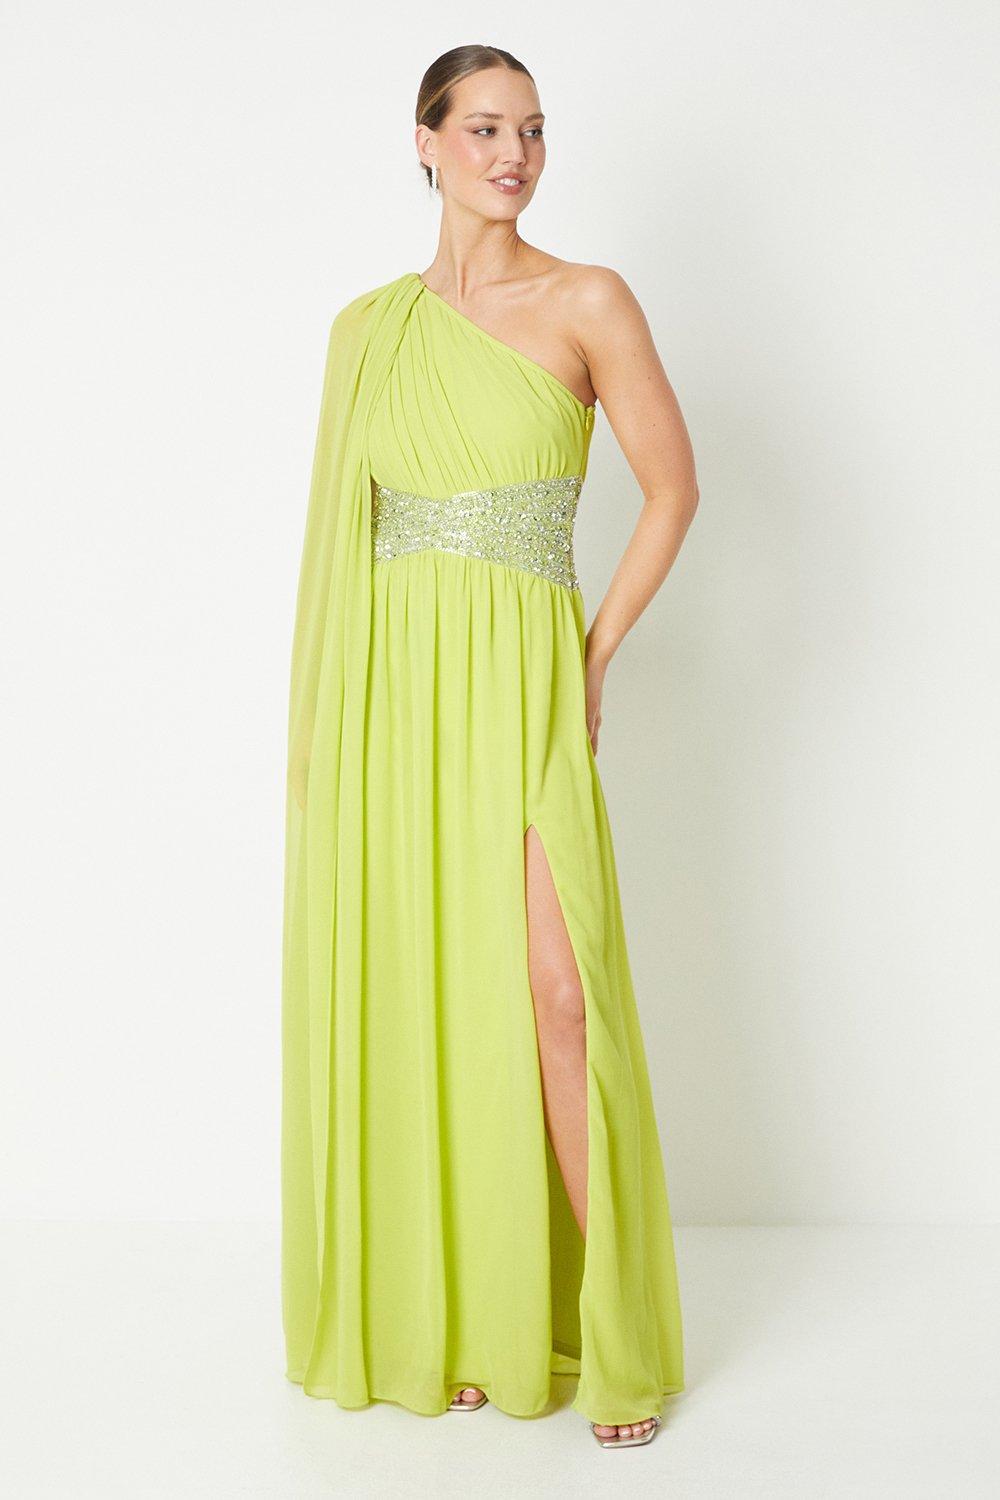 Chiffon Cape Sleeve Gown With Beaded Waistband - Black Tie - Green